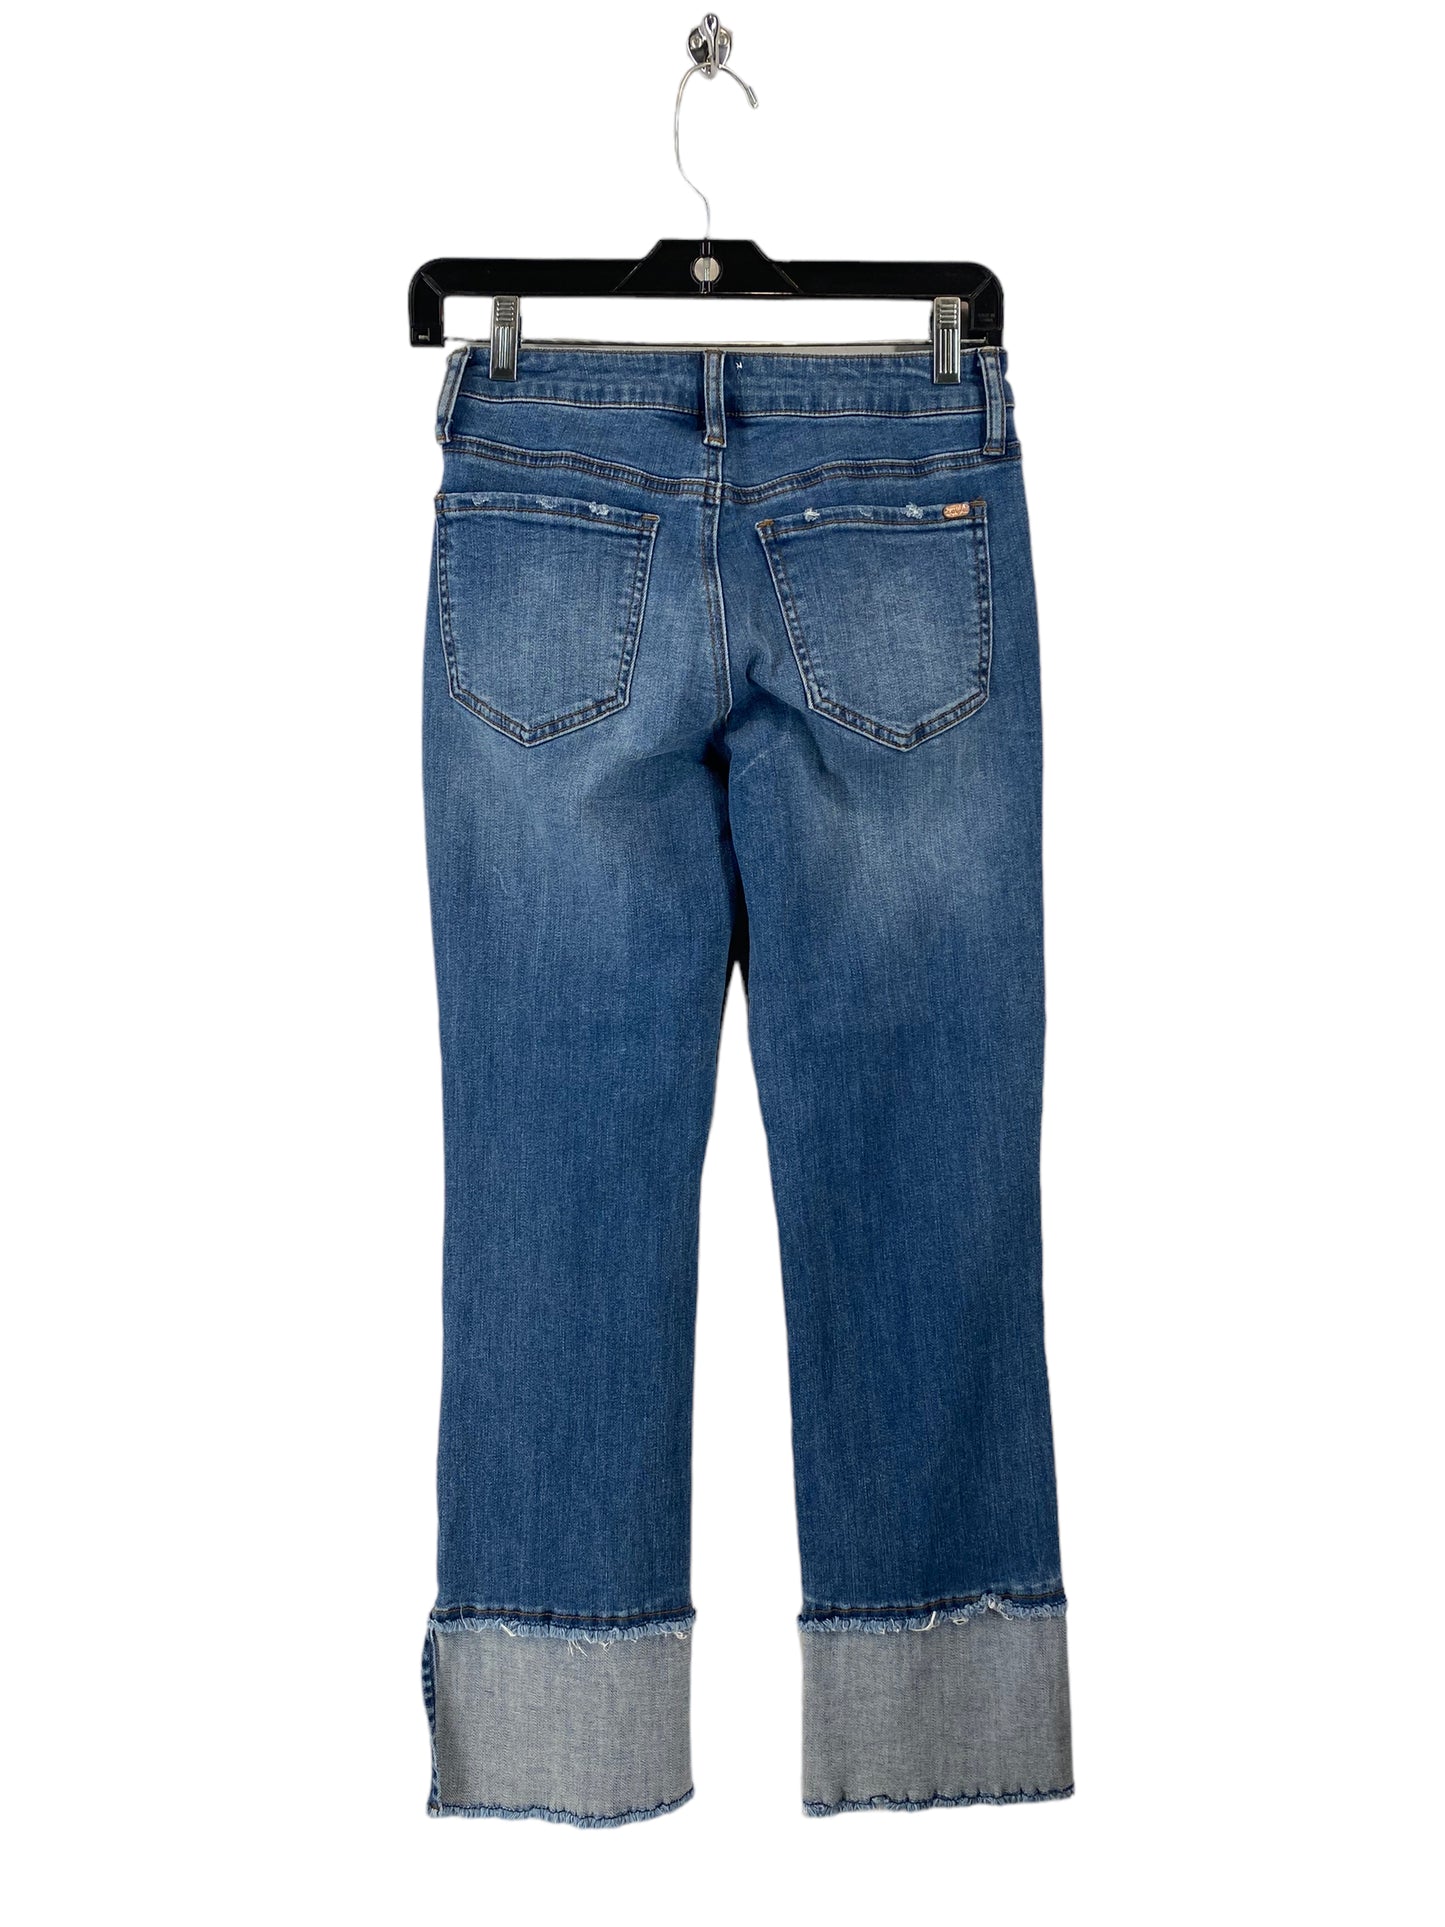 Jeans Skinny By Clothes Mentor  Size: 1